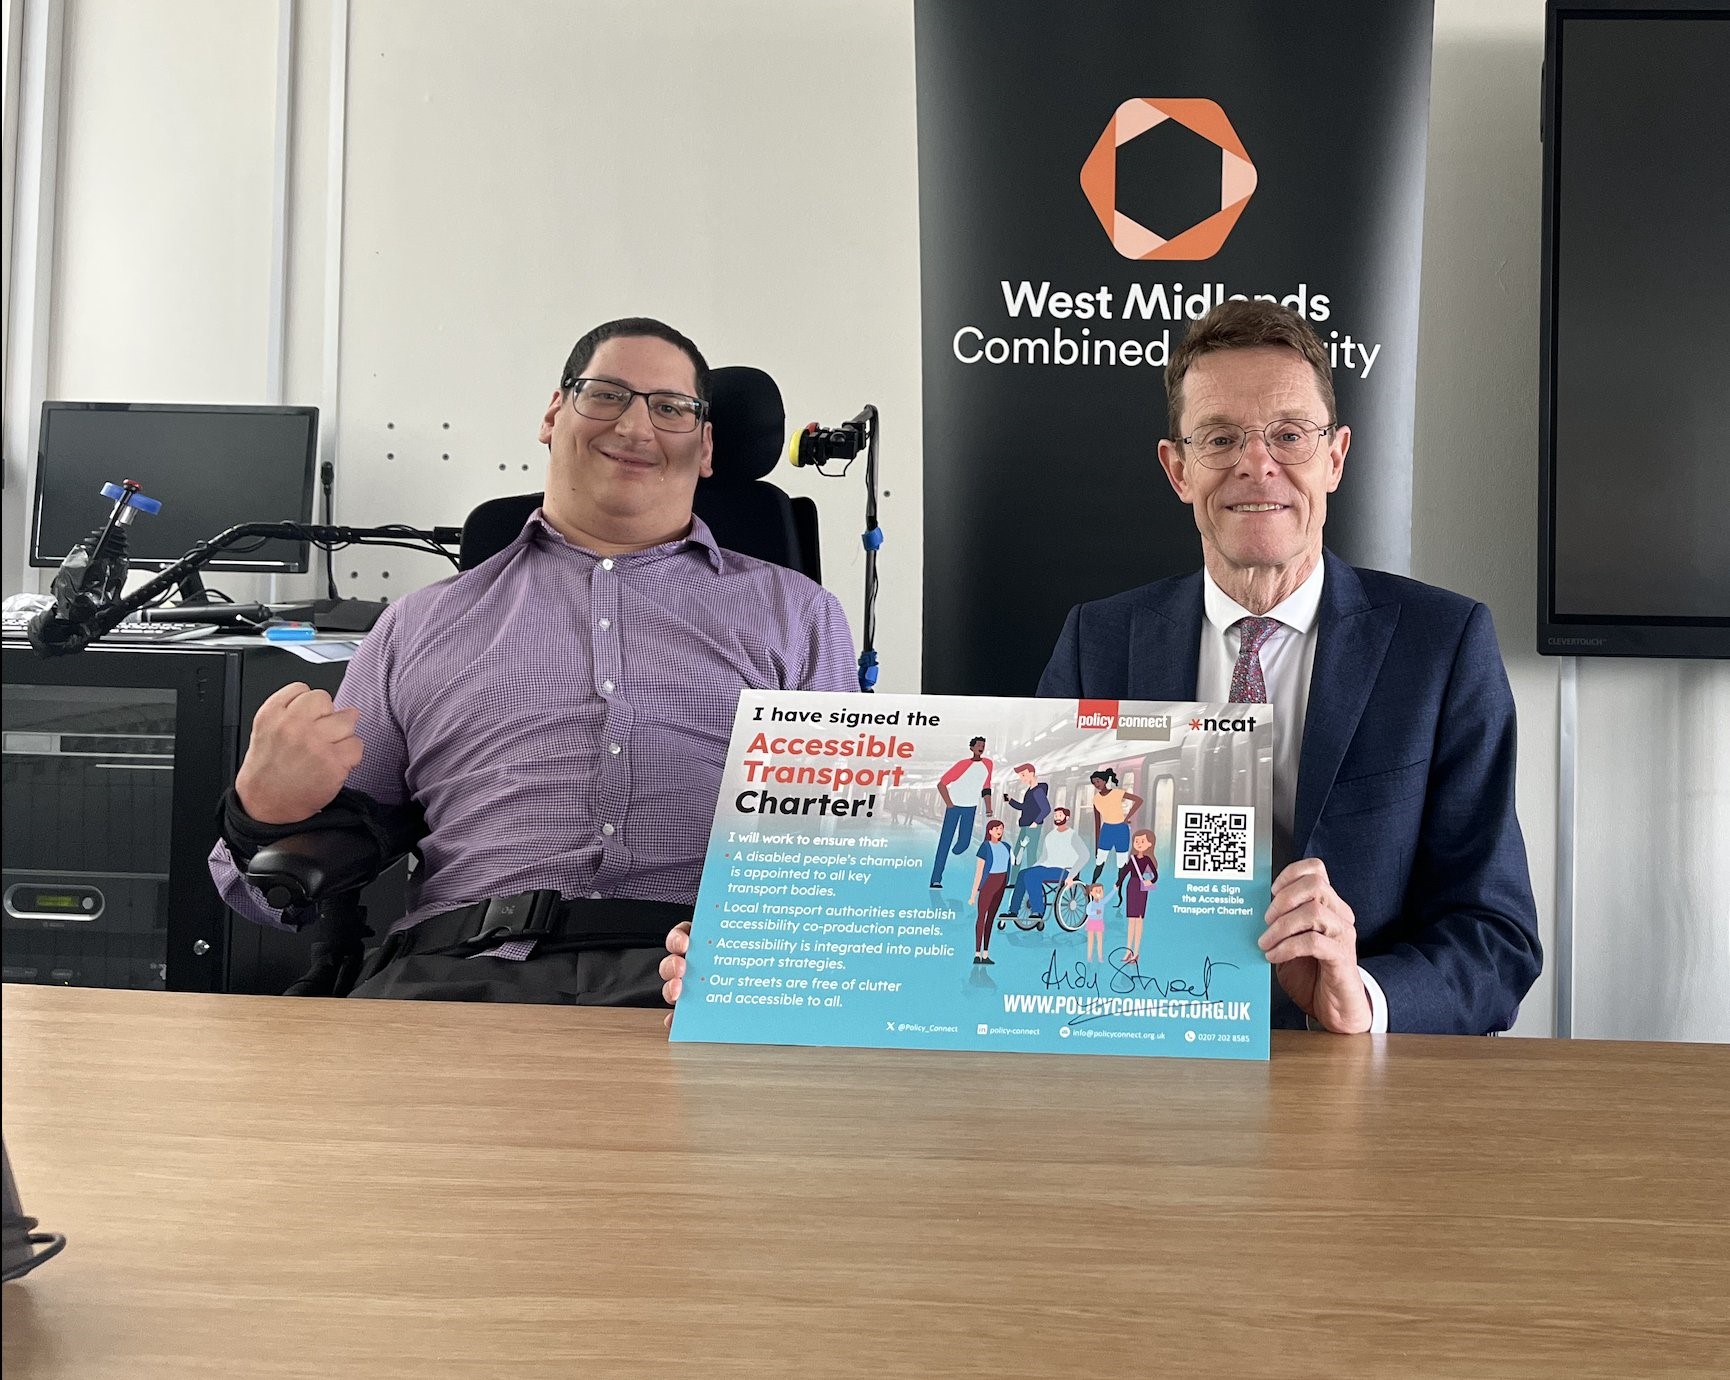 Clive Gilbert and Andy Street holding a copy of the Accessible Transport Charter